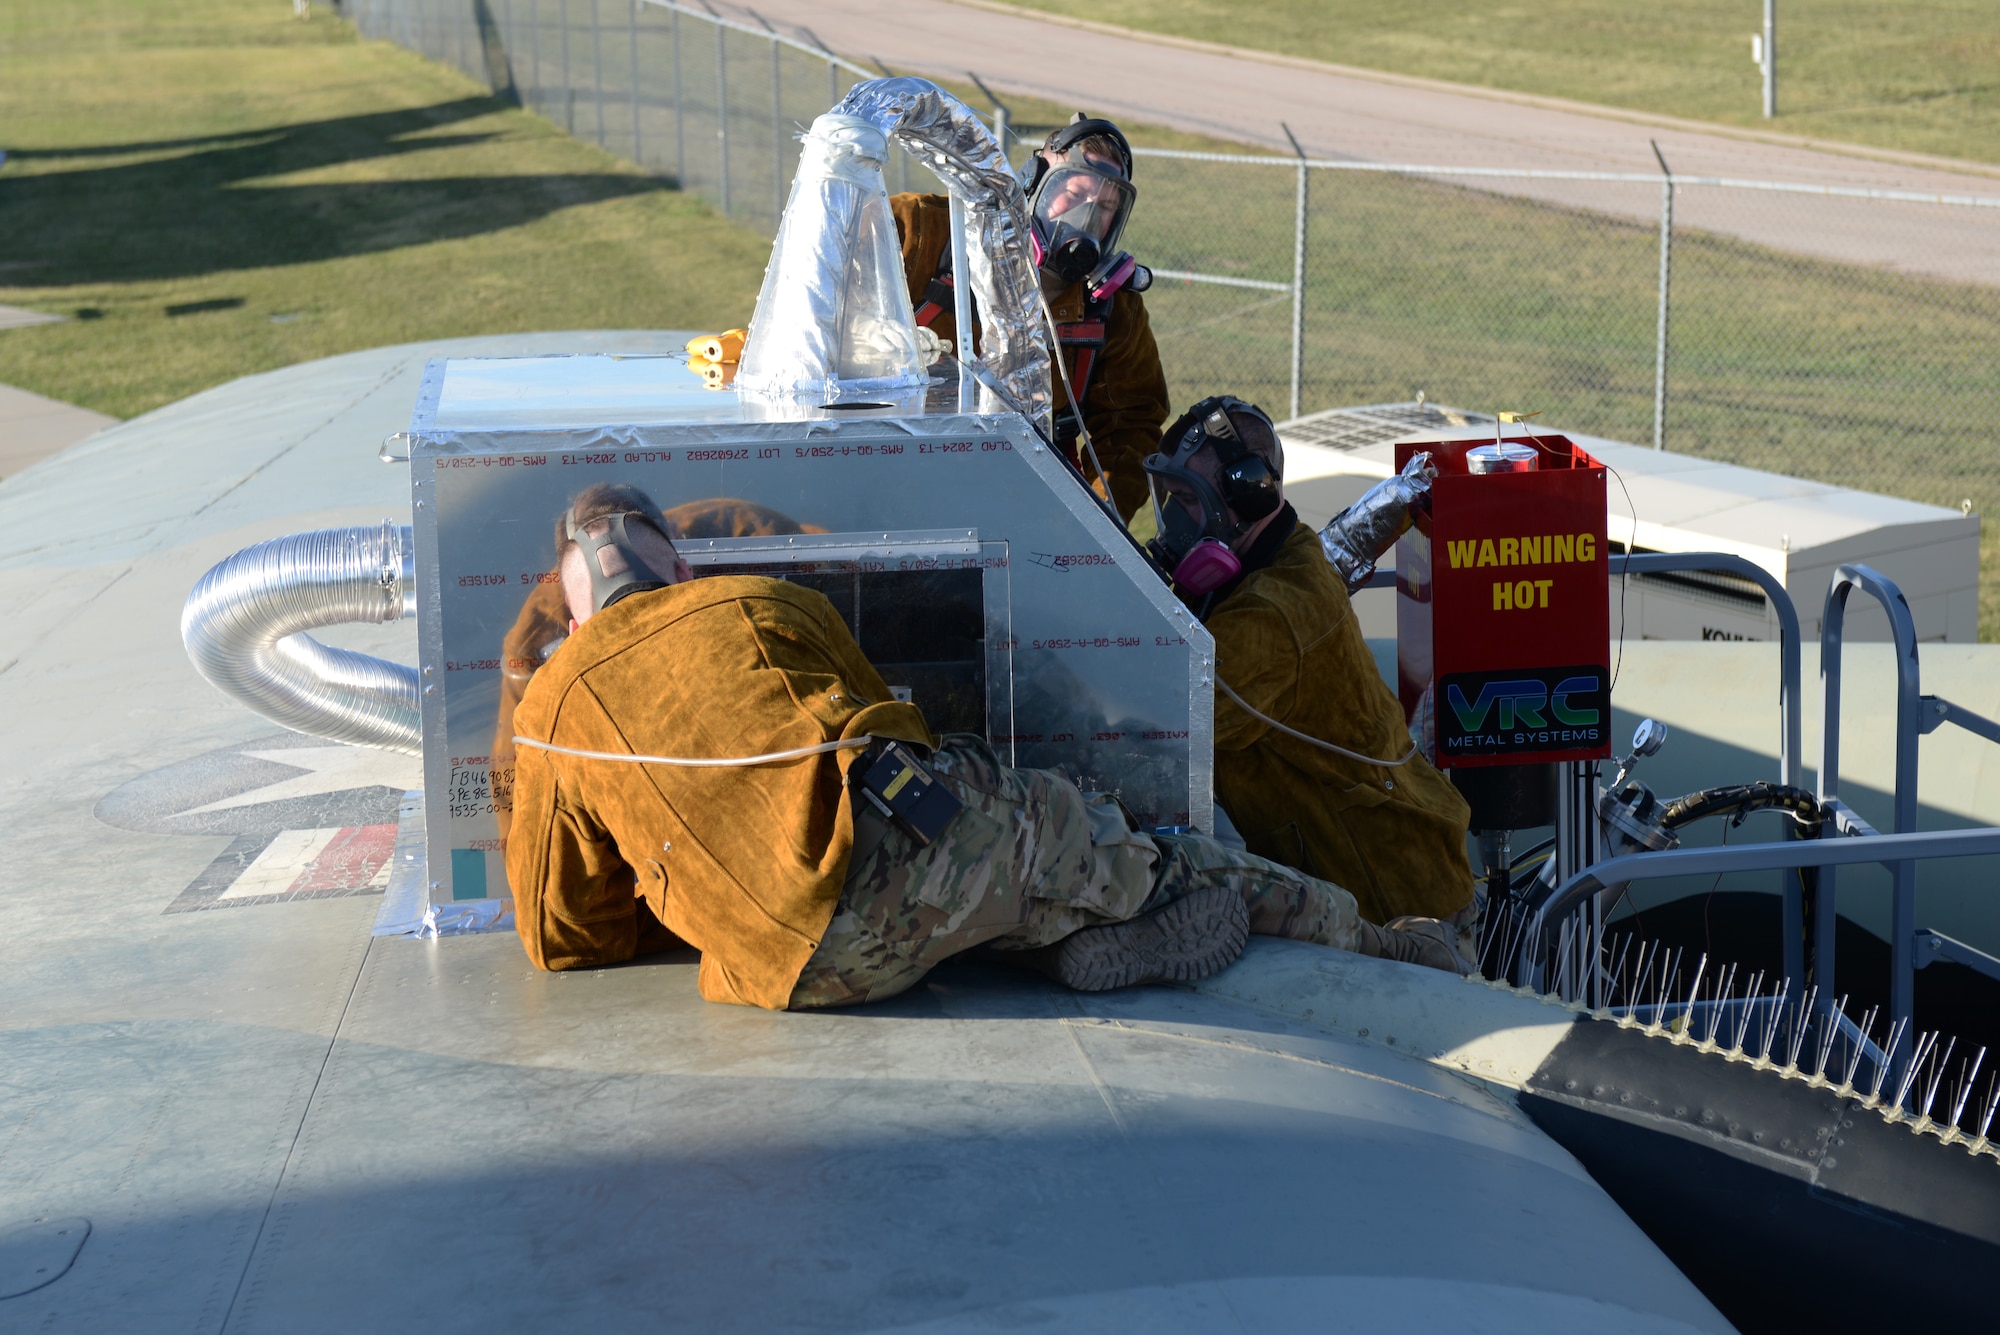 28th Maintenance Squadron Additive Manufacturing Rapid Repair Facility Airmen perform a Cold Spray repair on the B-52 Stratofortress static display at the South Dakota Air and Space Museum in Box Elder, S.D., Sept. 18, 2019. The GEN III High-Pressure Cold Spray unit uses helium gas to accelerate spherical aluminum particles to bond with the surface needing repaired. (U.S. Air Force photo by Airman Quentin K. Marx)